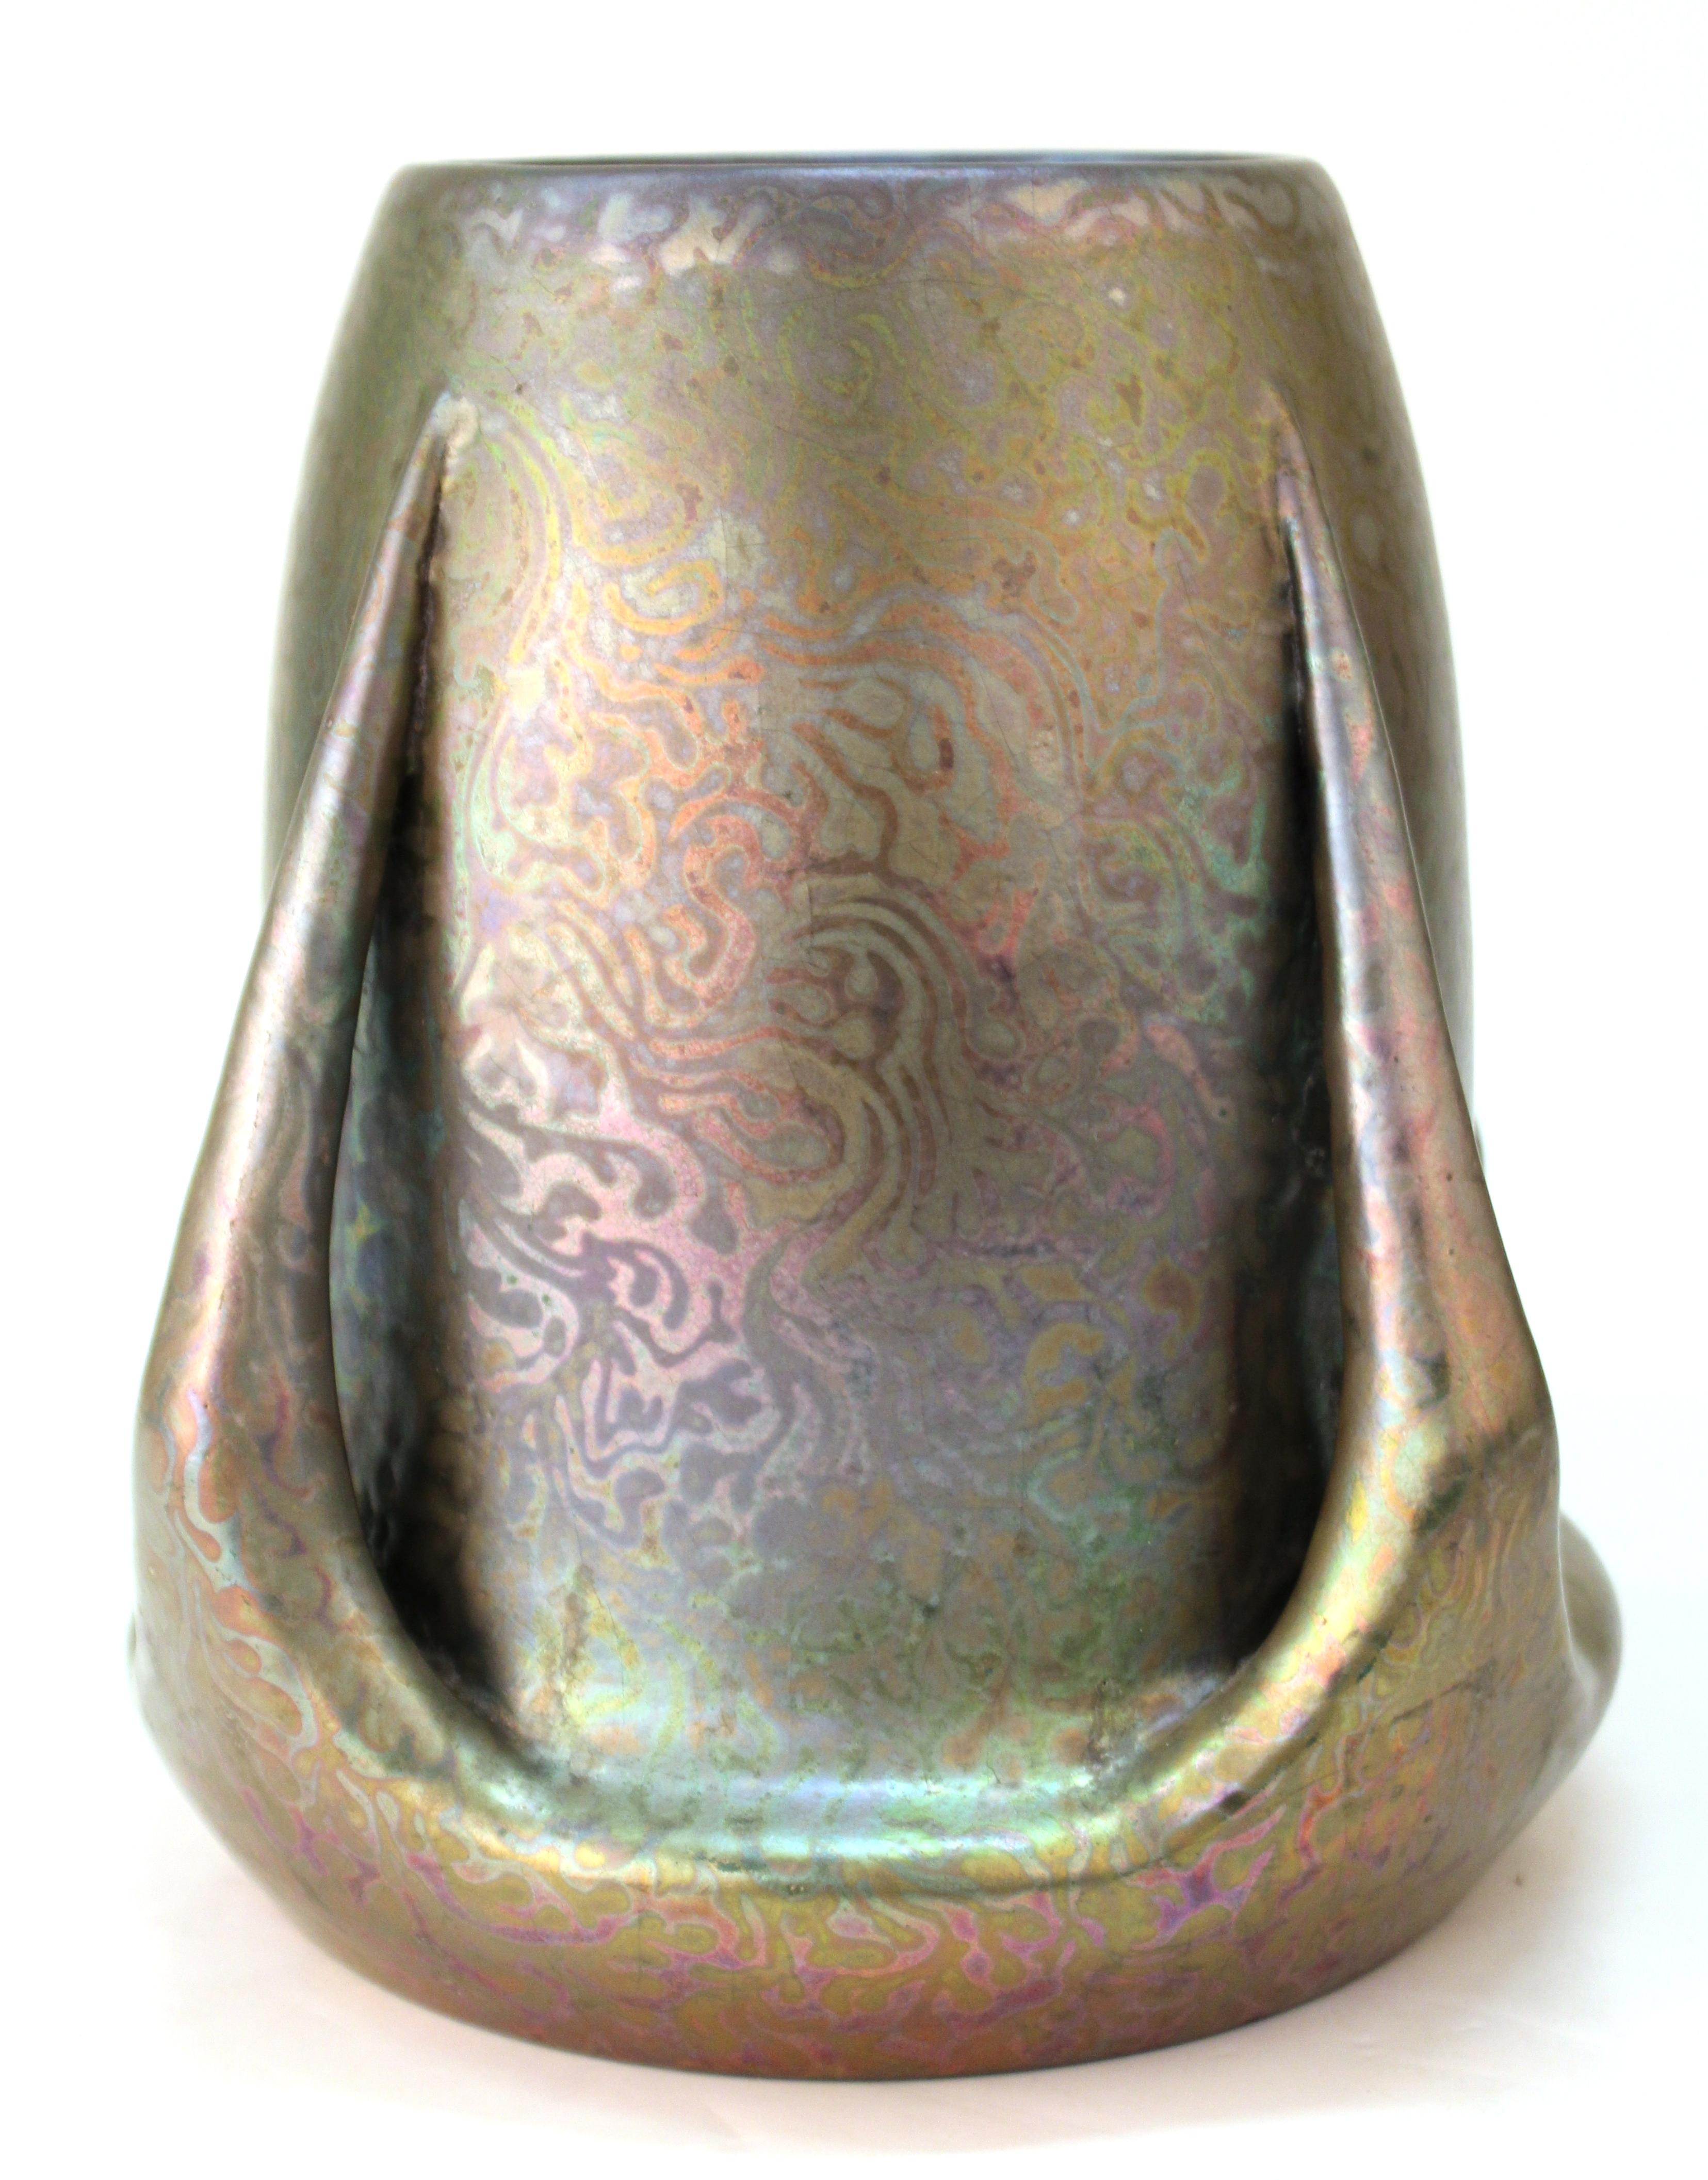 French Art Nouveau 'Golfe-Juan' ceramic luster vase with four tapering handles, created by Clement Massier (1844-1917), circa 1900. The underside is marked in the glaze and has impressed marks. Some light cracquelure on surface.